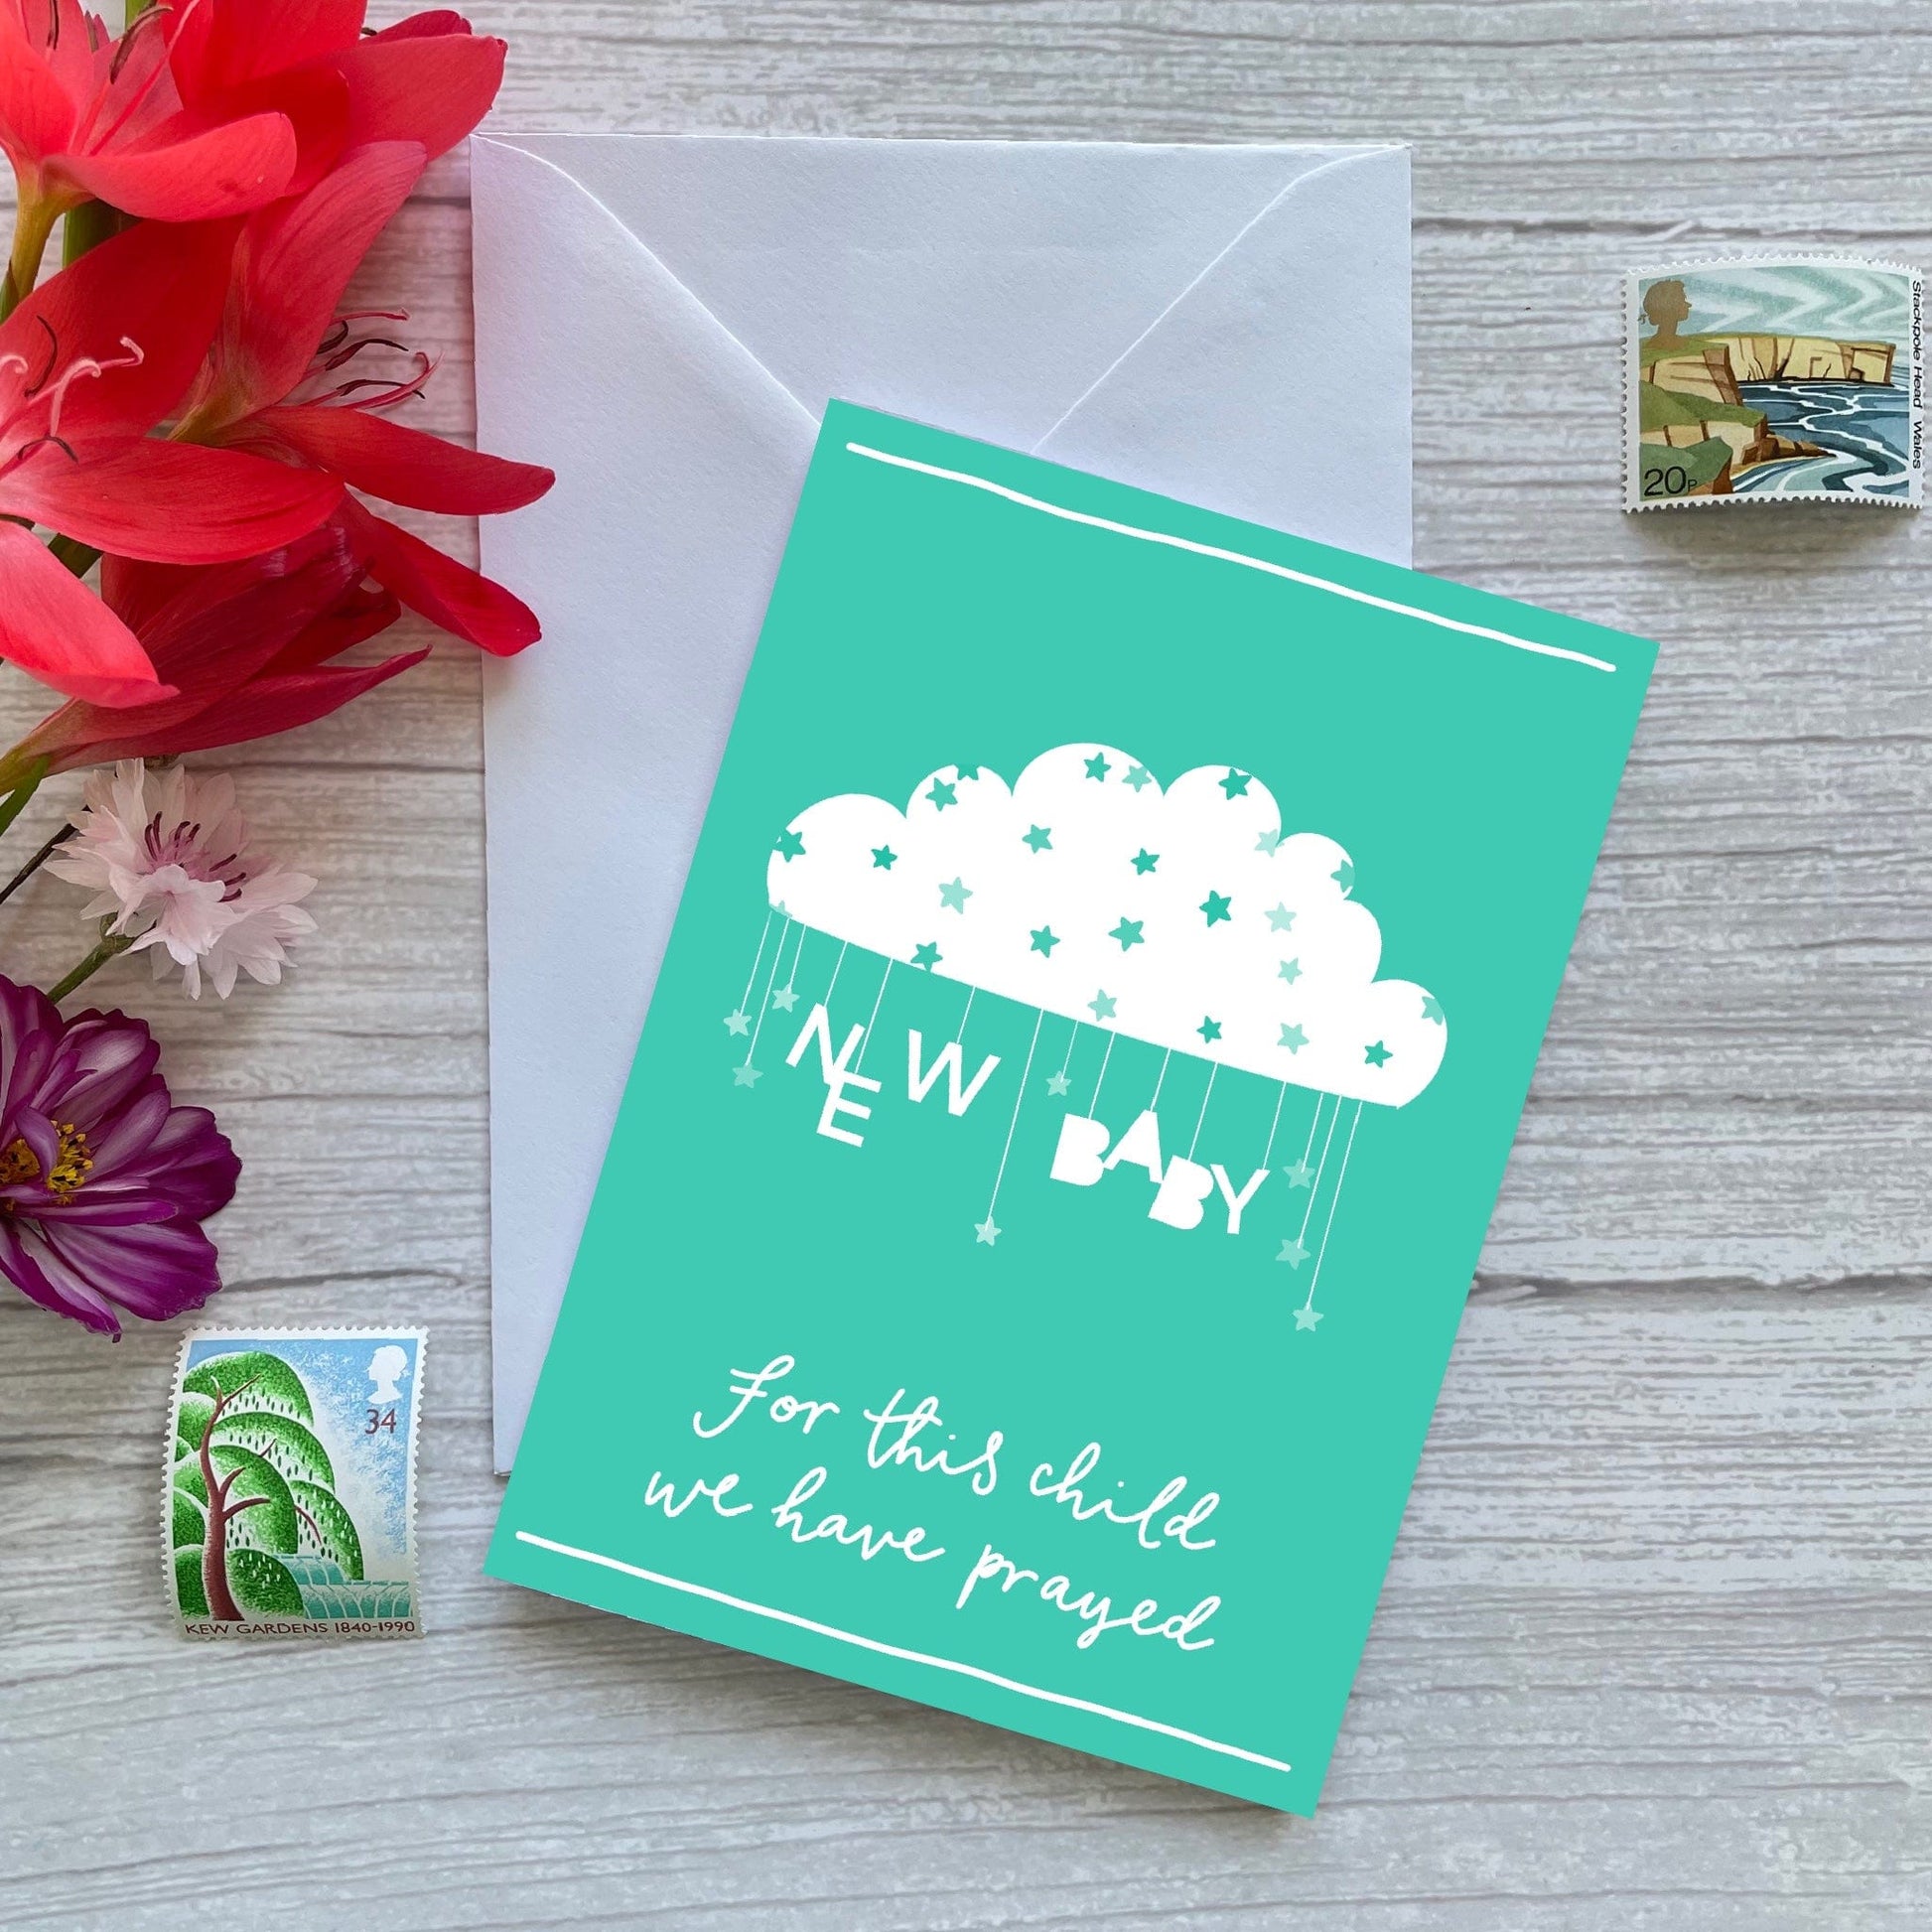 And Hope Designs Greeting & Note Cards Christian new baby card - for this child we have prayed